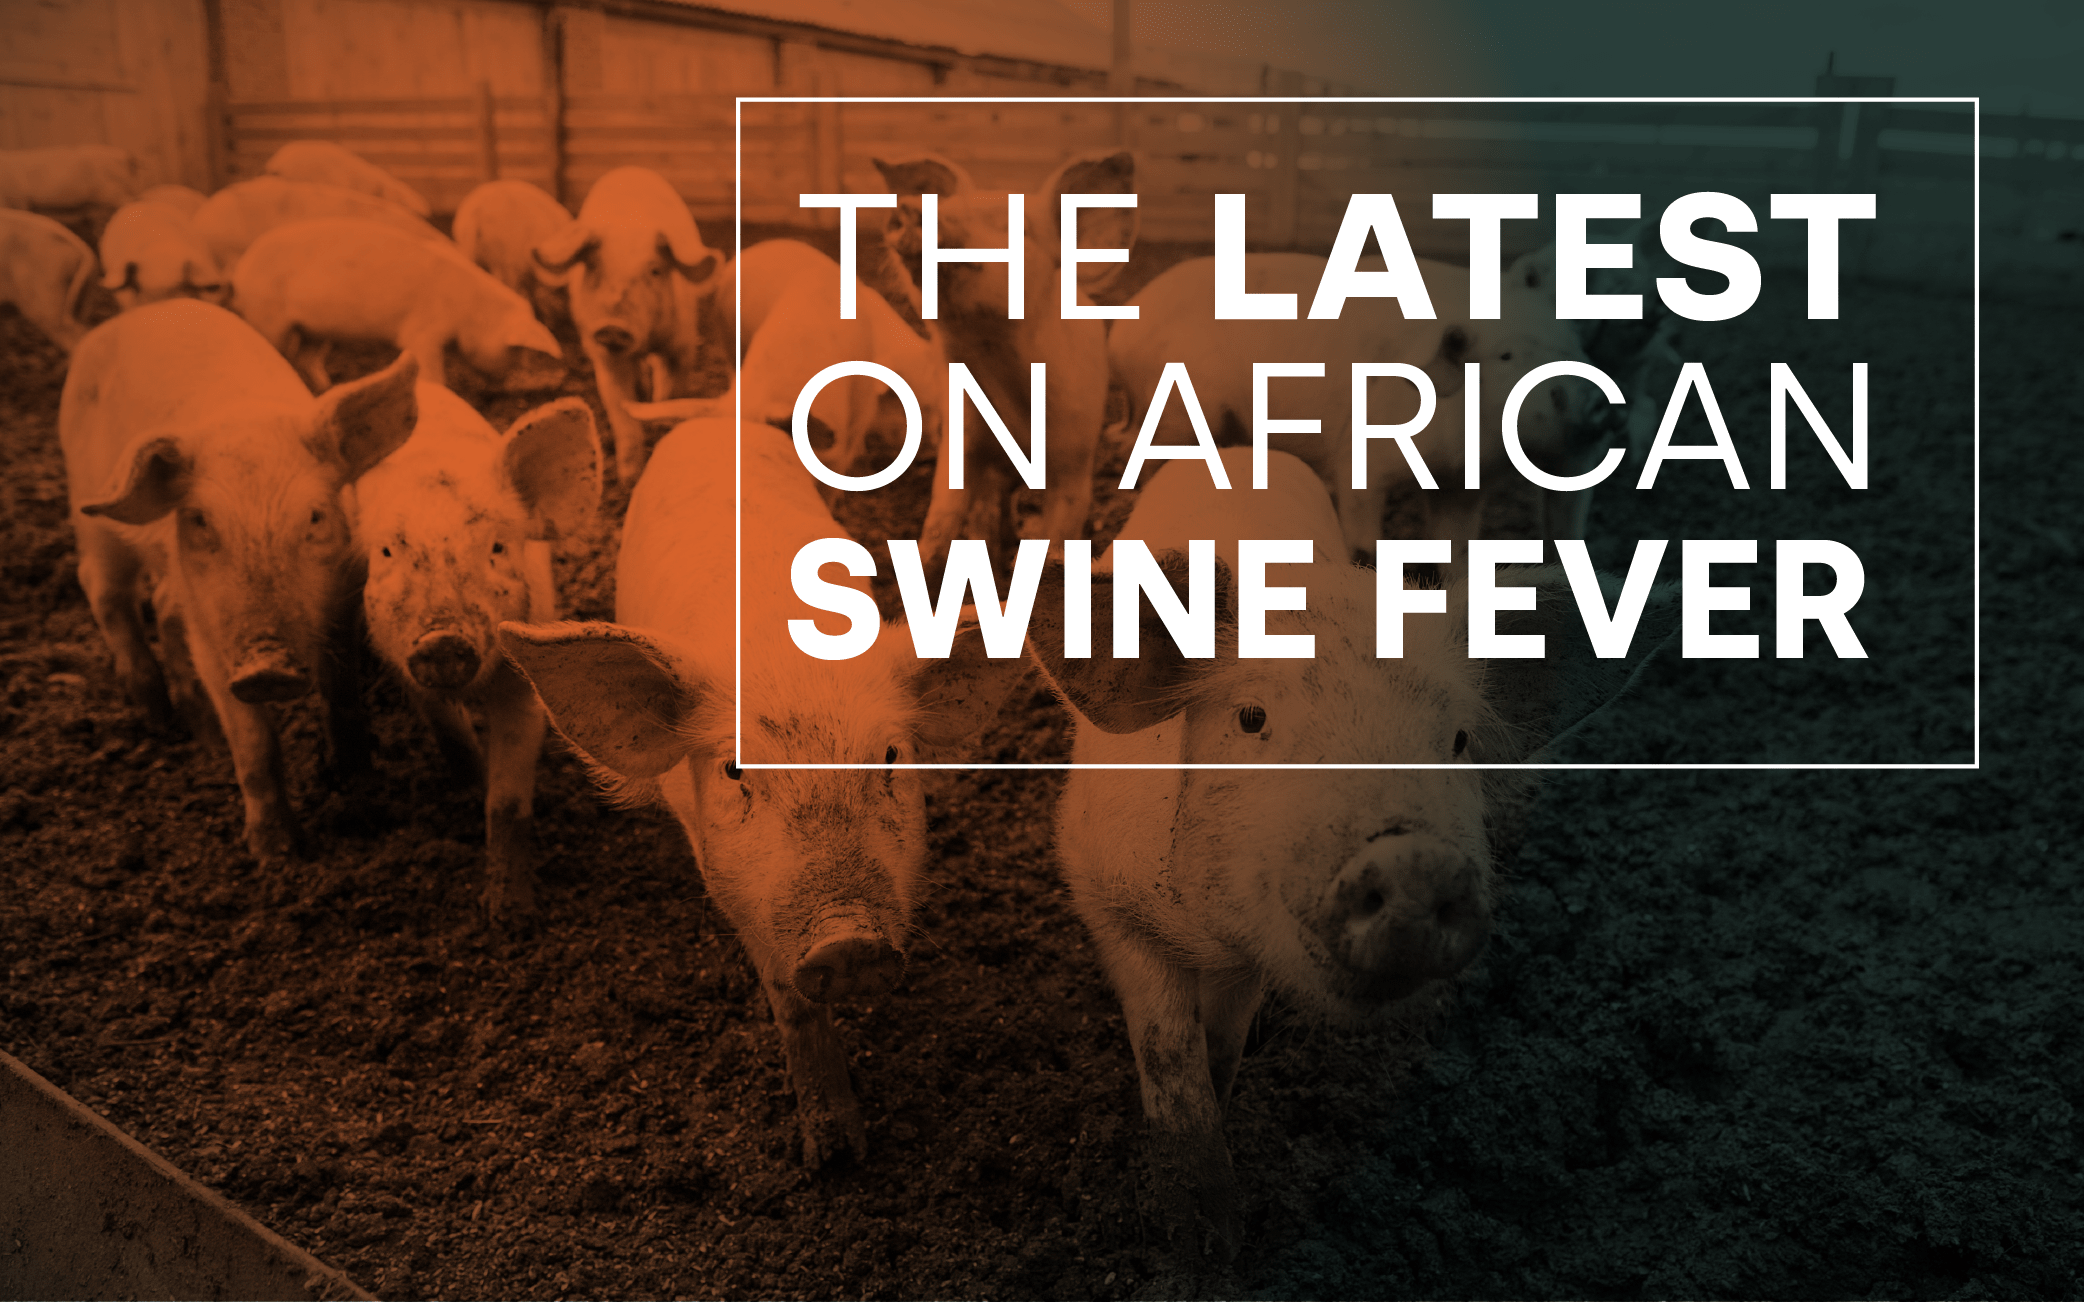 The latest on African Swine Fever